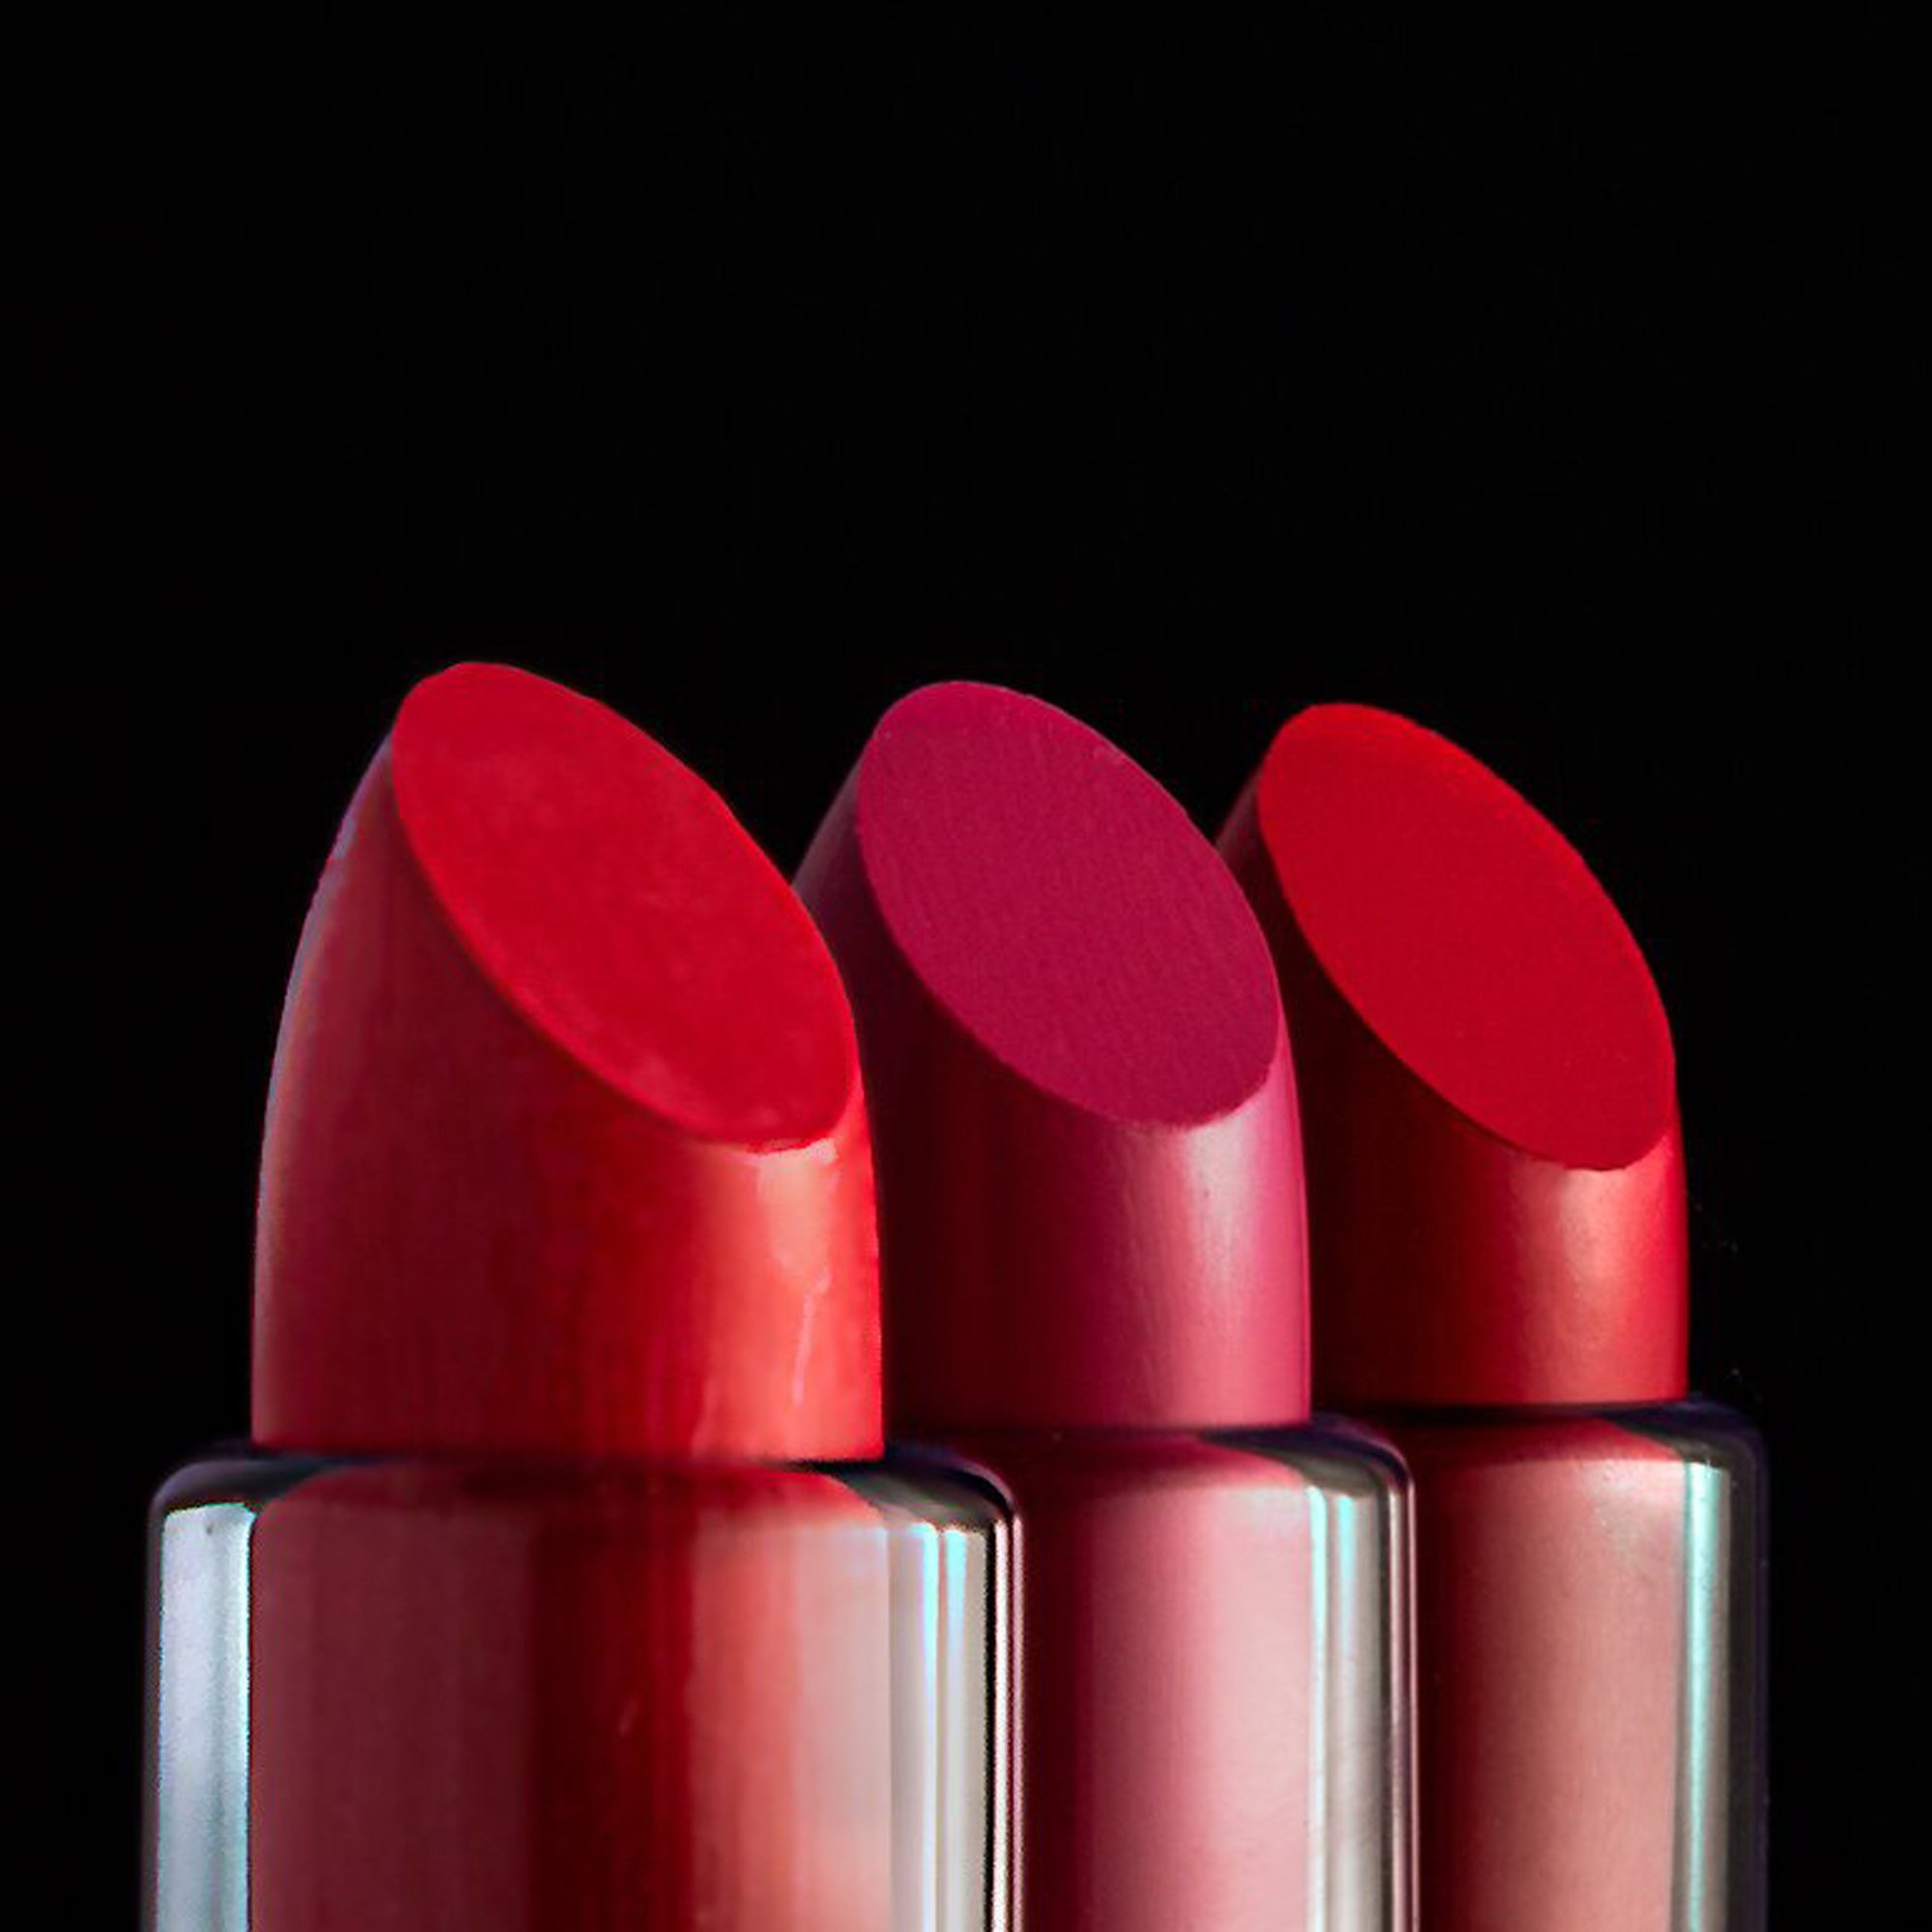  Dramatic dark background used to make red lipstick stand out  